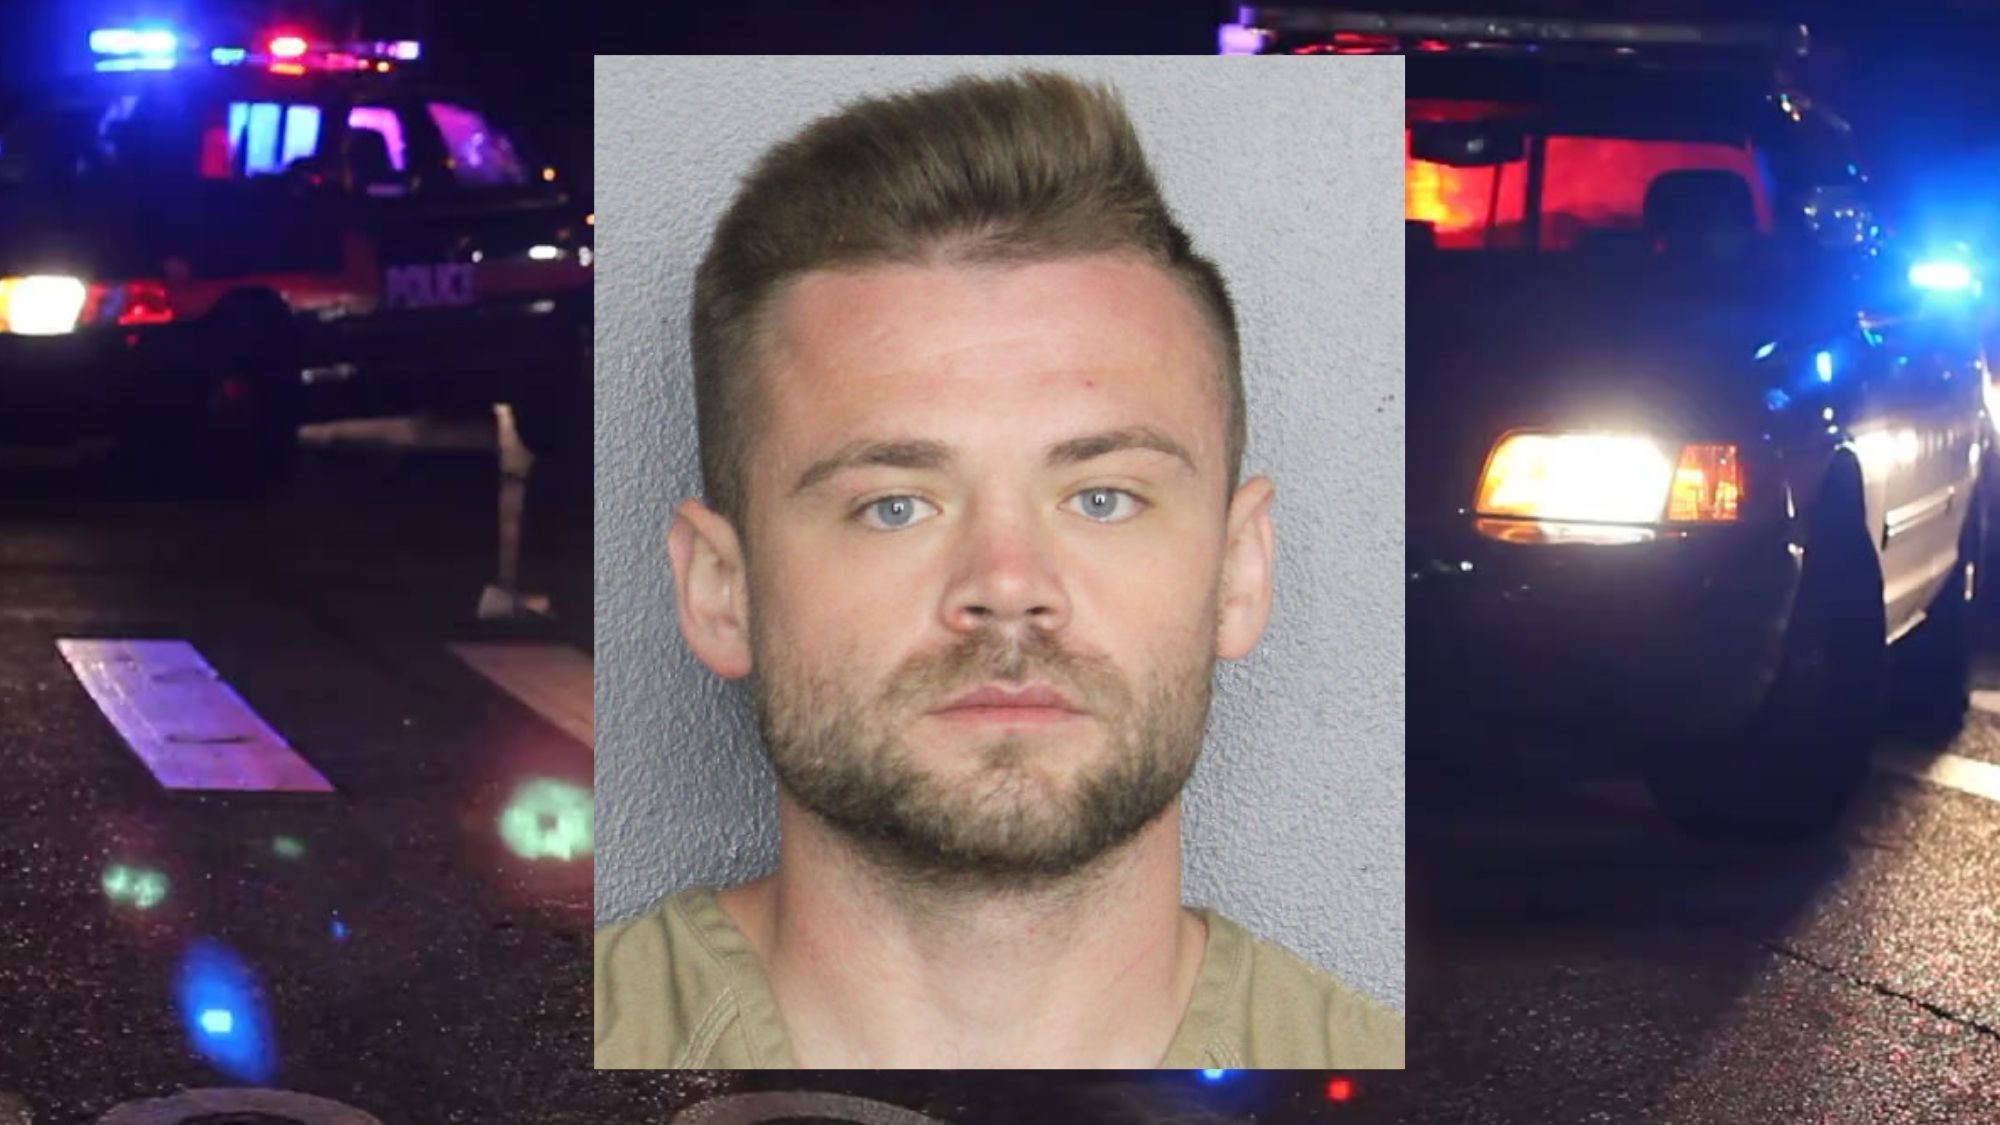 Man Arrested for False Bomb Threat at Fort Lauderdale-Hollywood International Airport